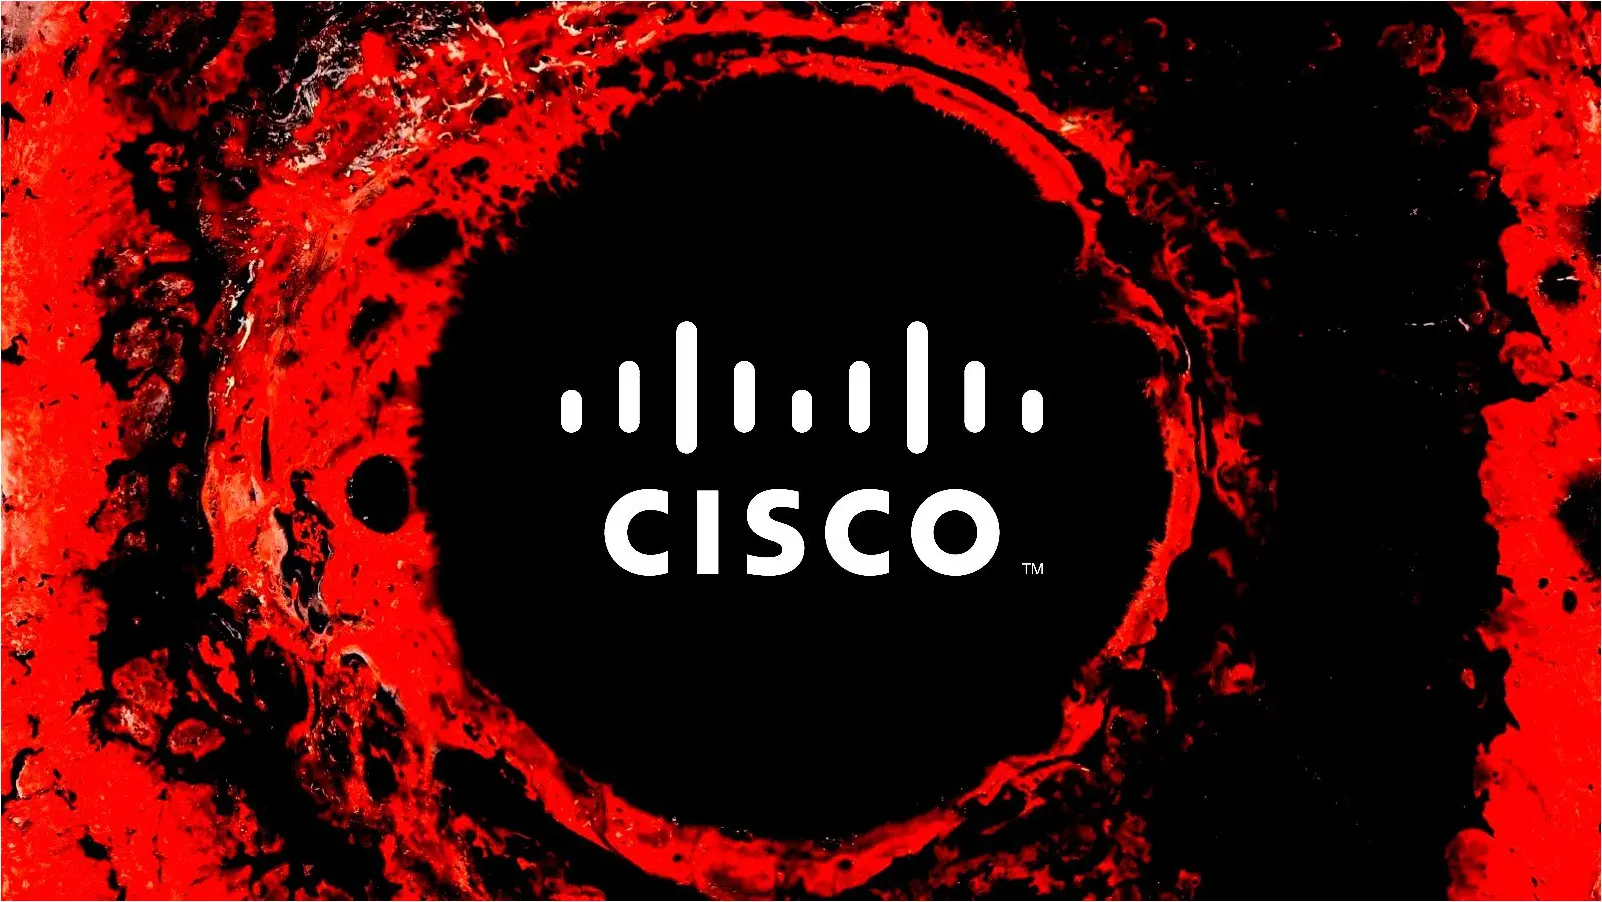 Cisco warns of critical RCE flaw in communications software